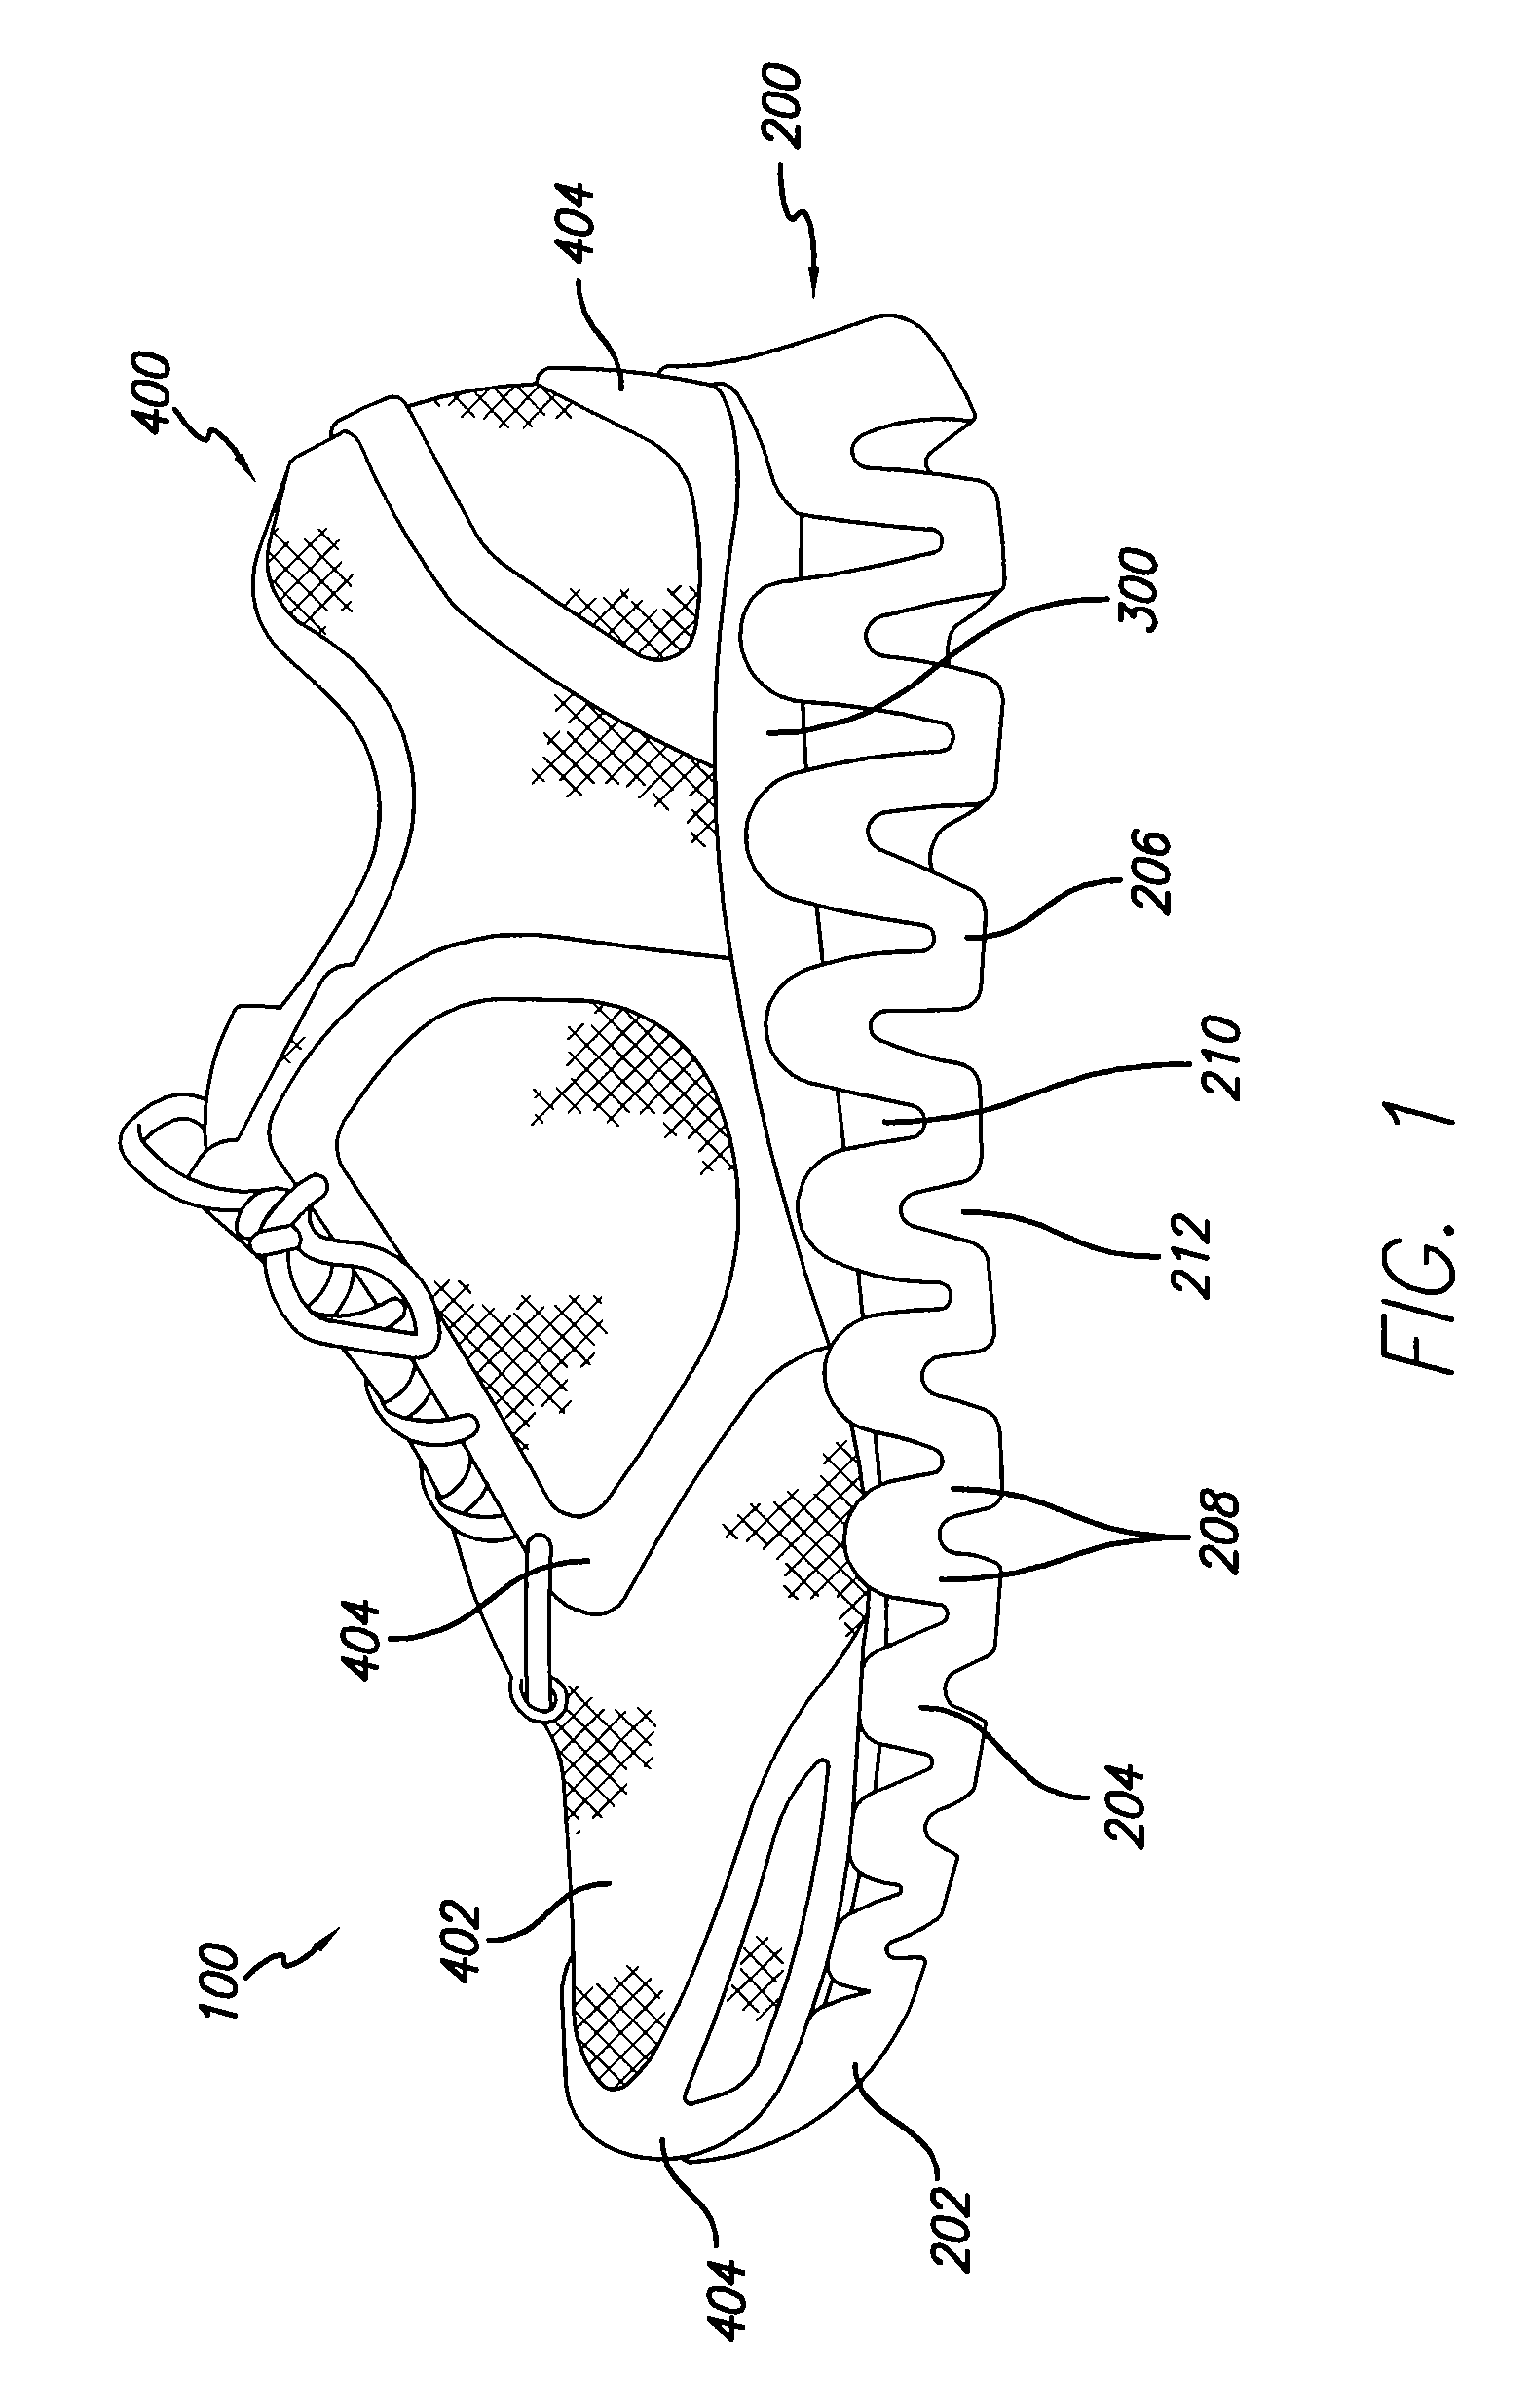 Article of Footwear Having an Undulating Sole